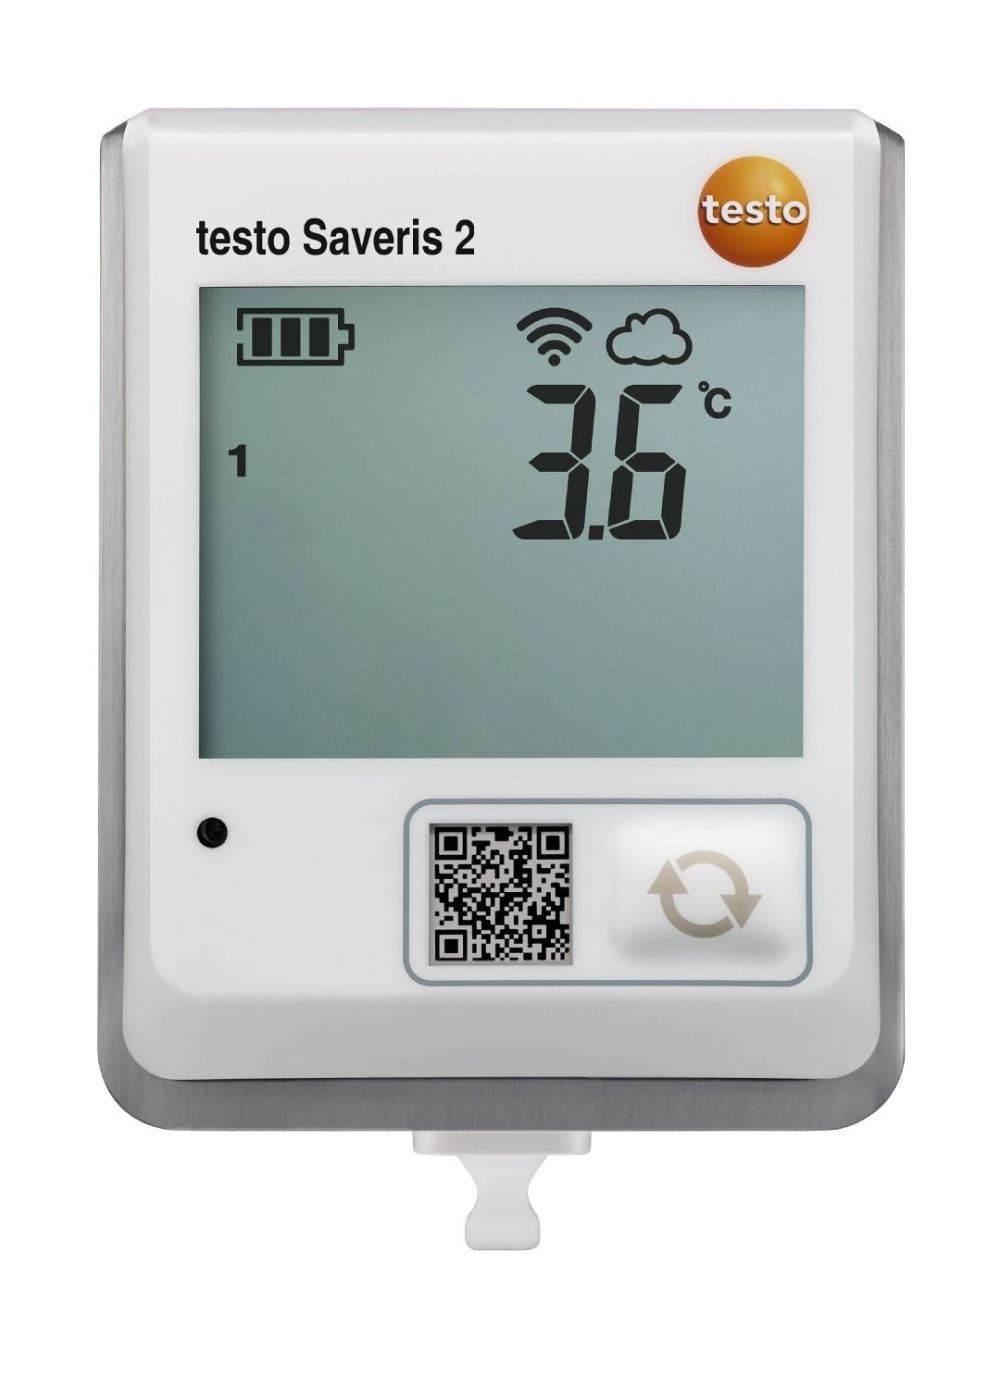 testo saveris 2-t1 wifi data logger with display and integrated ntc temperature probe